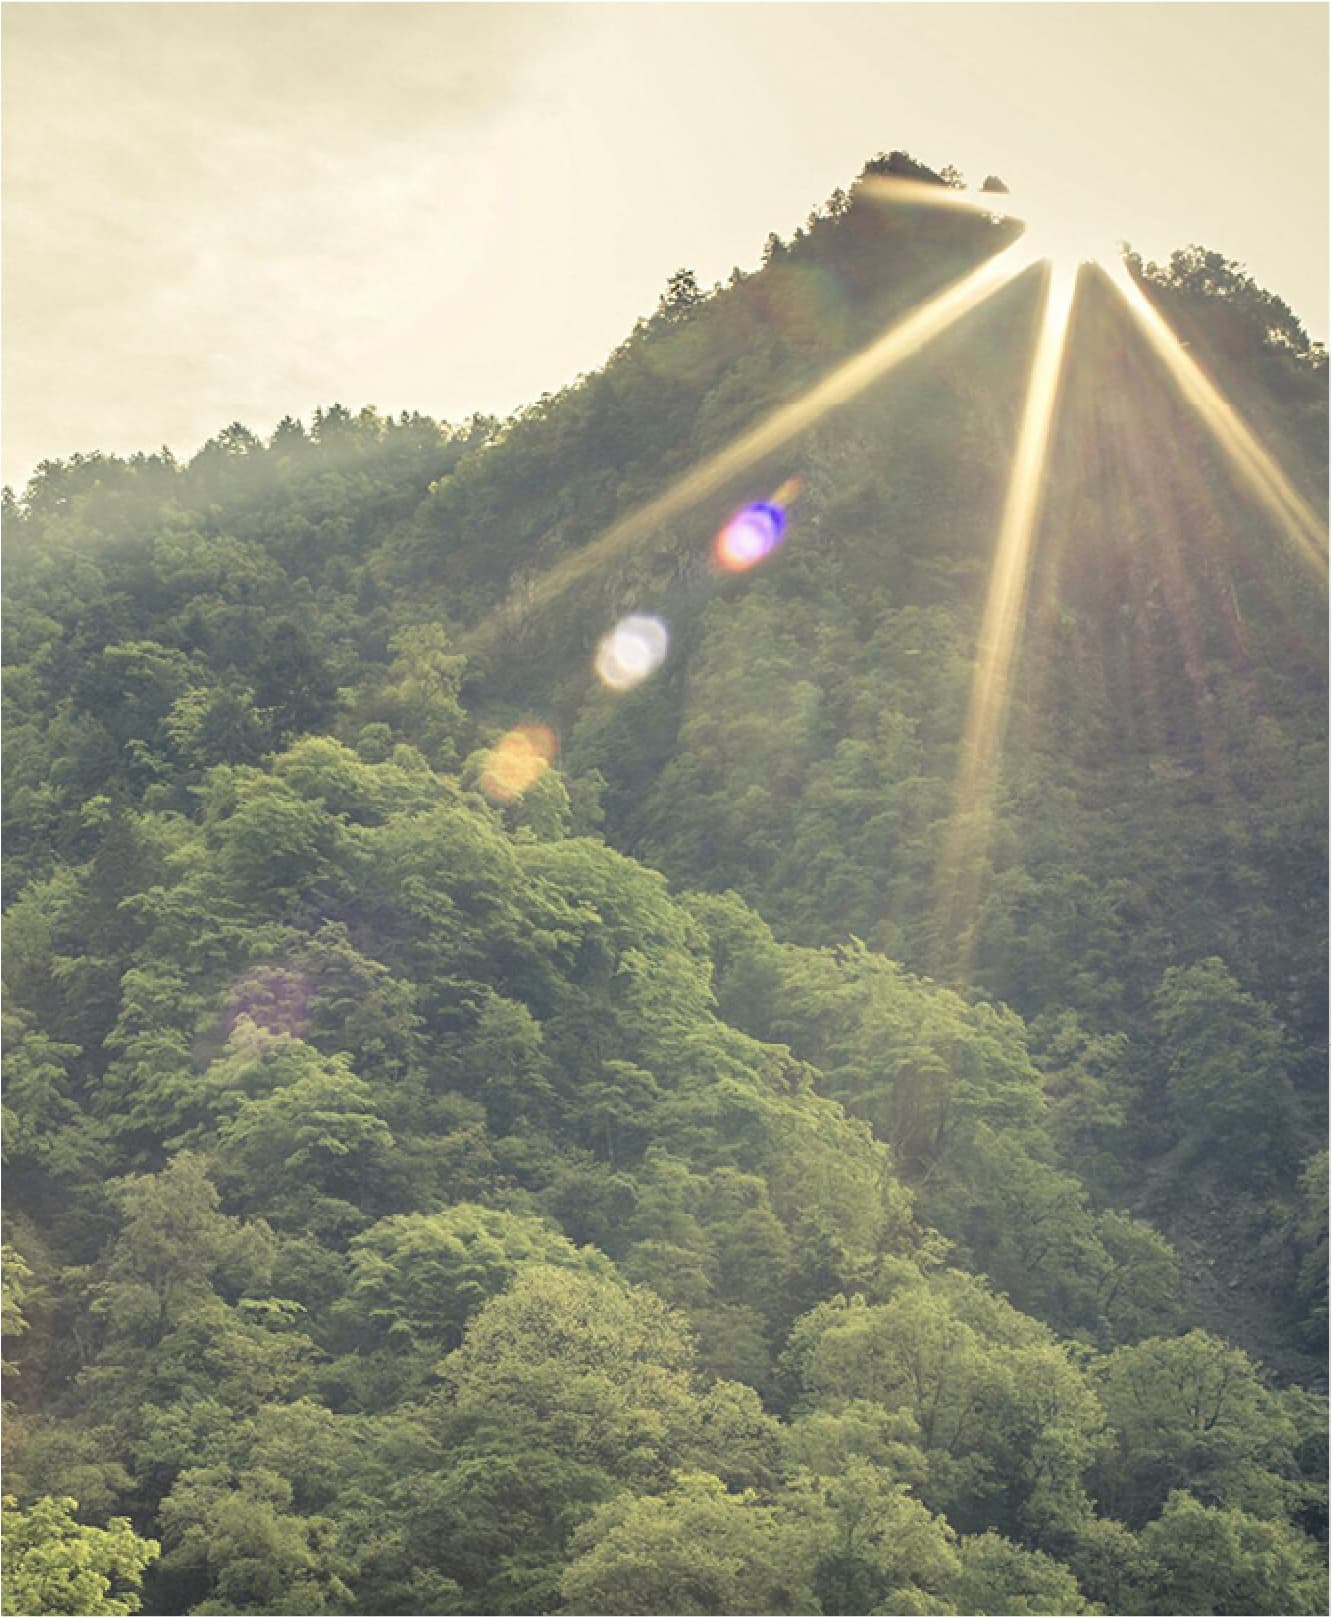 The sun flares in the lens just above the peak of a lush green, densely forested mountain landscape. Several peaks and the indentations of valleys are visible, and the sky appears partially white and dense as if inside a cloud.